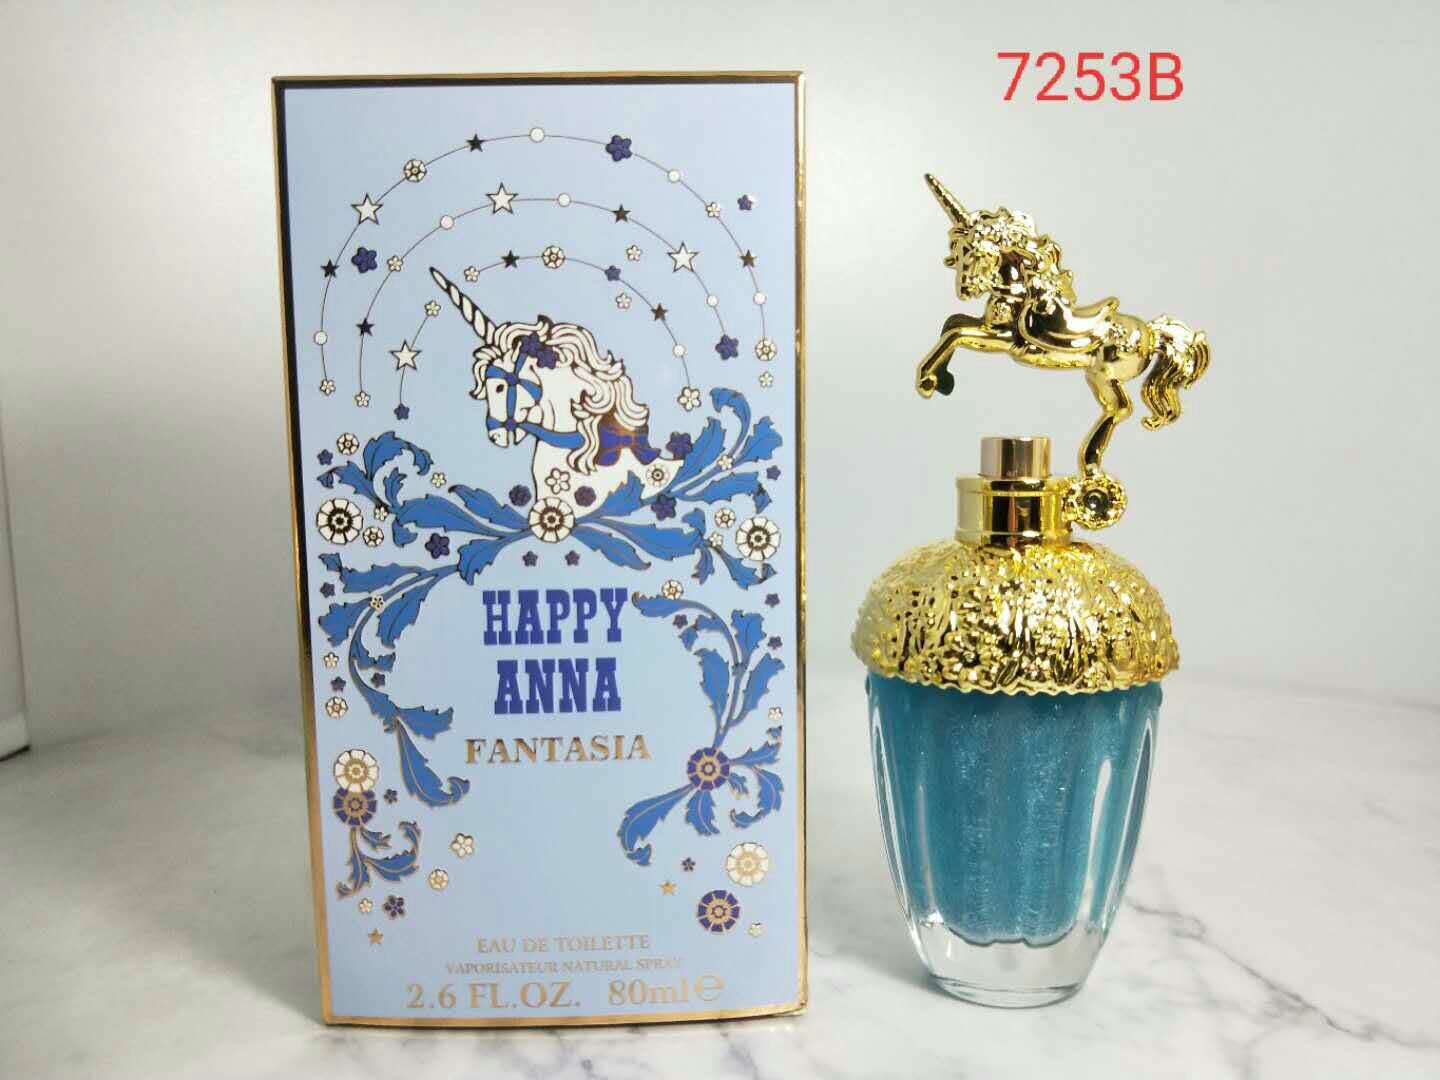 Unicorn Dream Tianma Fairy Tale Fantasia Perfume for Women Lady Student Long-Lasting Natural Fresh Light Floral and Fruit Aroma